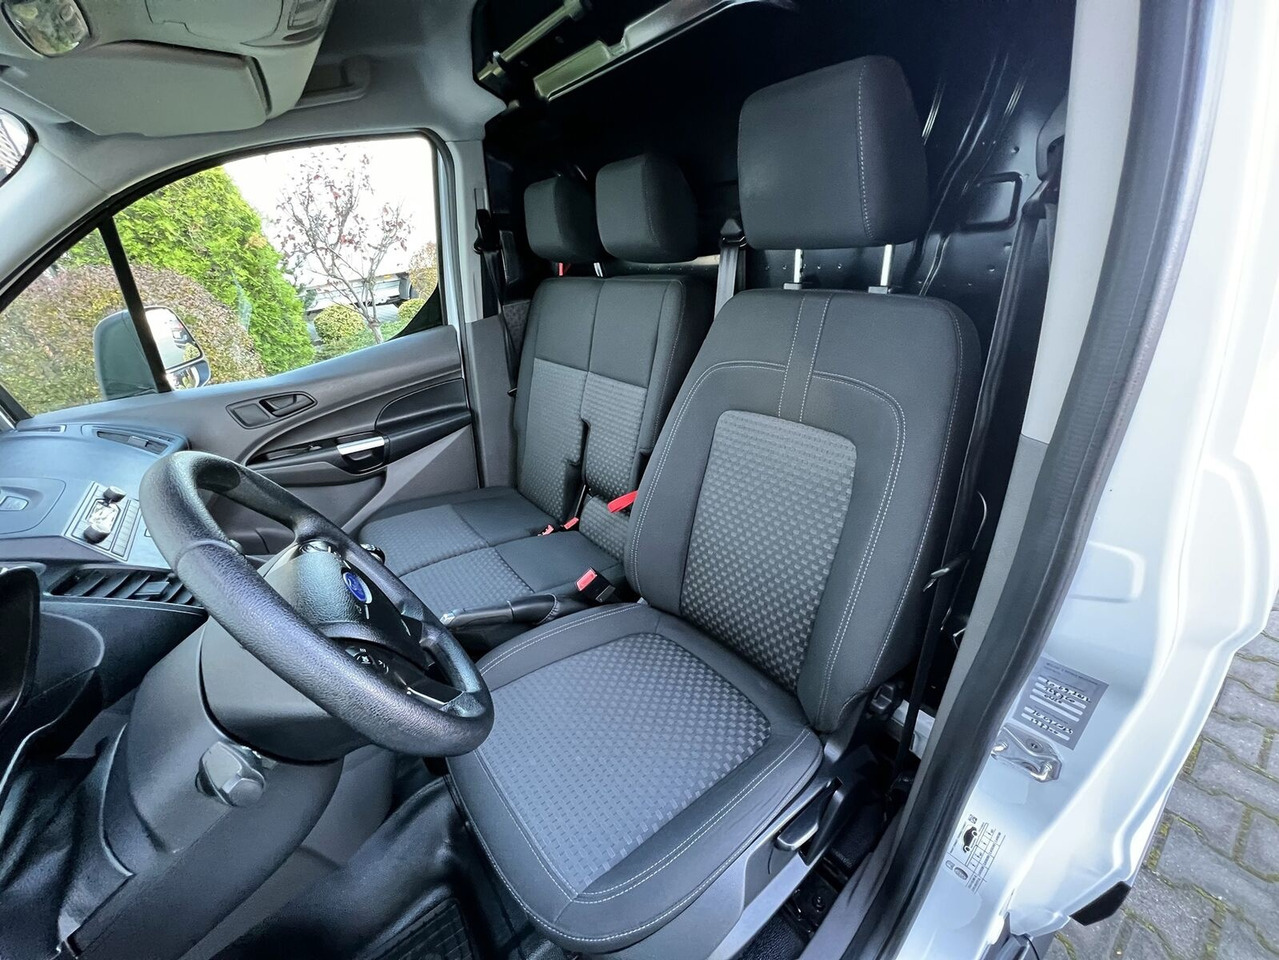 Leasing Ford Transit Connect Ford Transit Connect: kuva Leasing Ford Transit Connect Ford Transit Connect